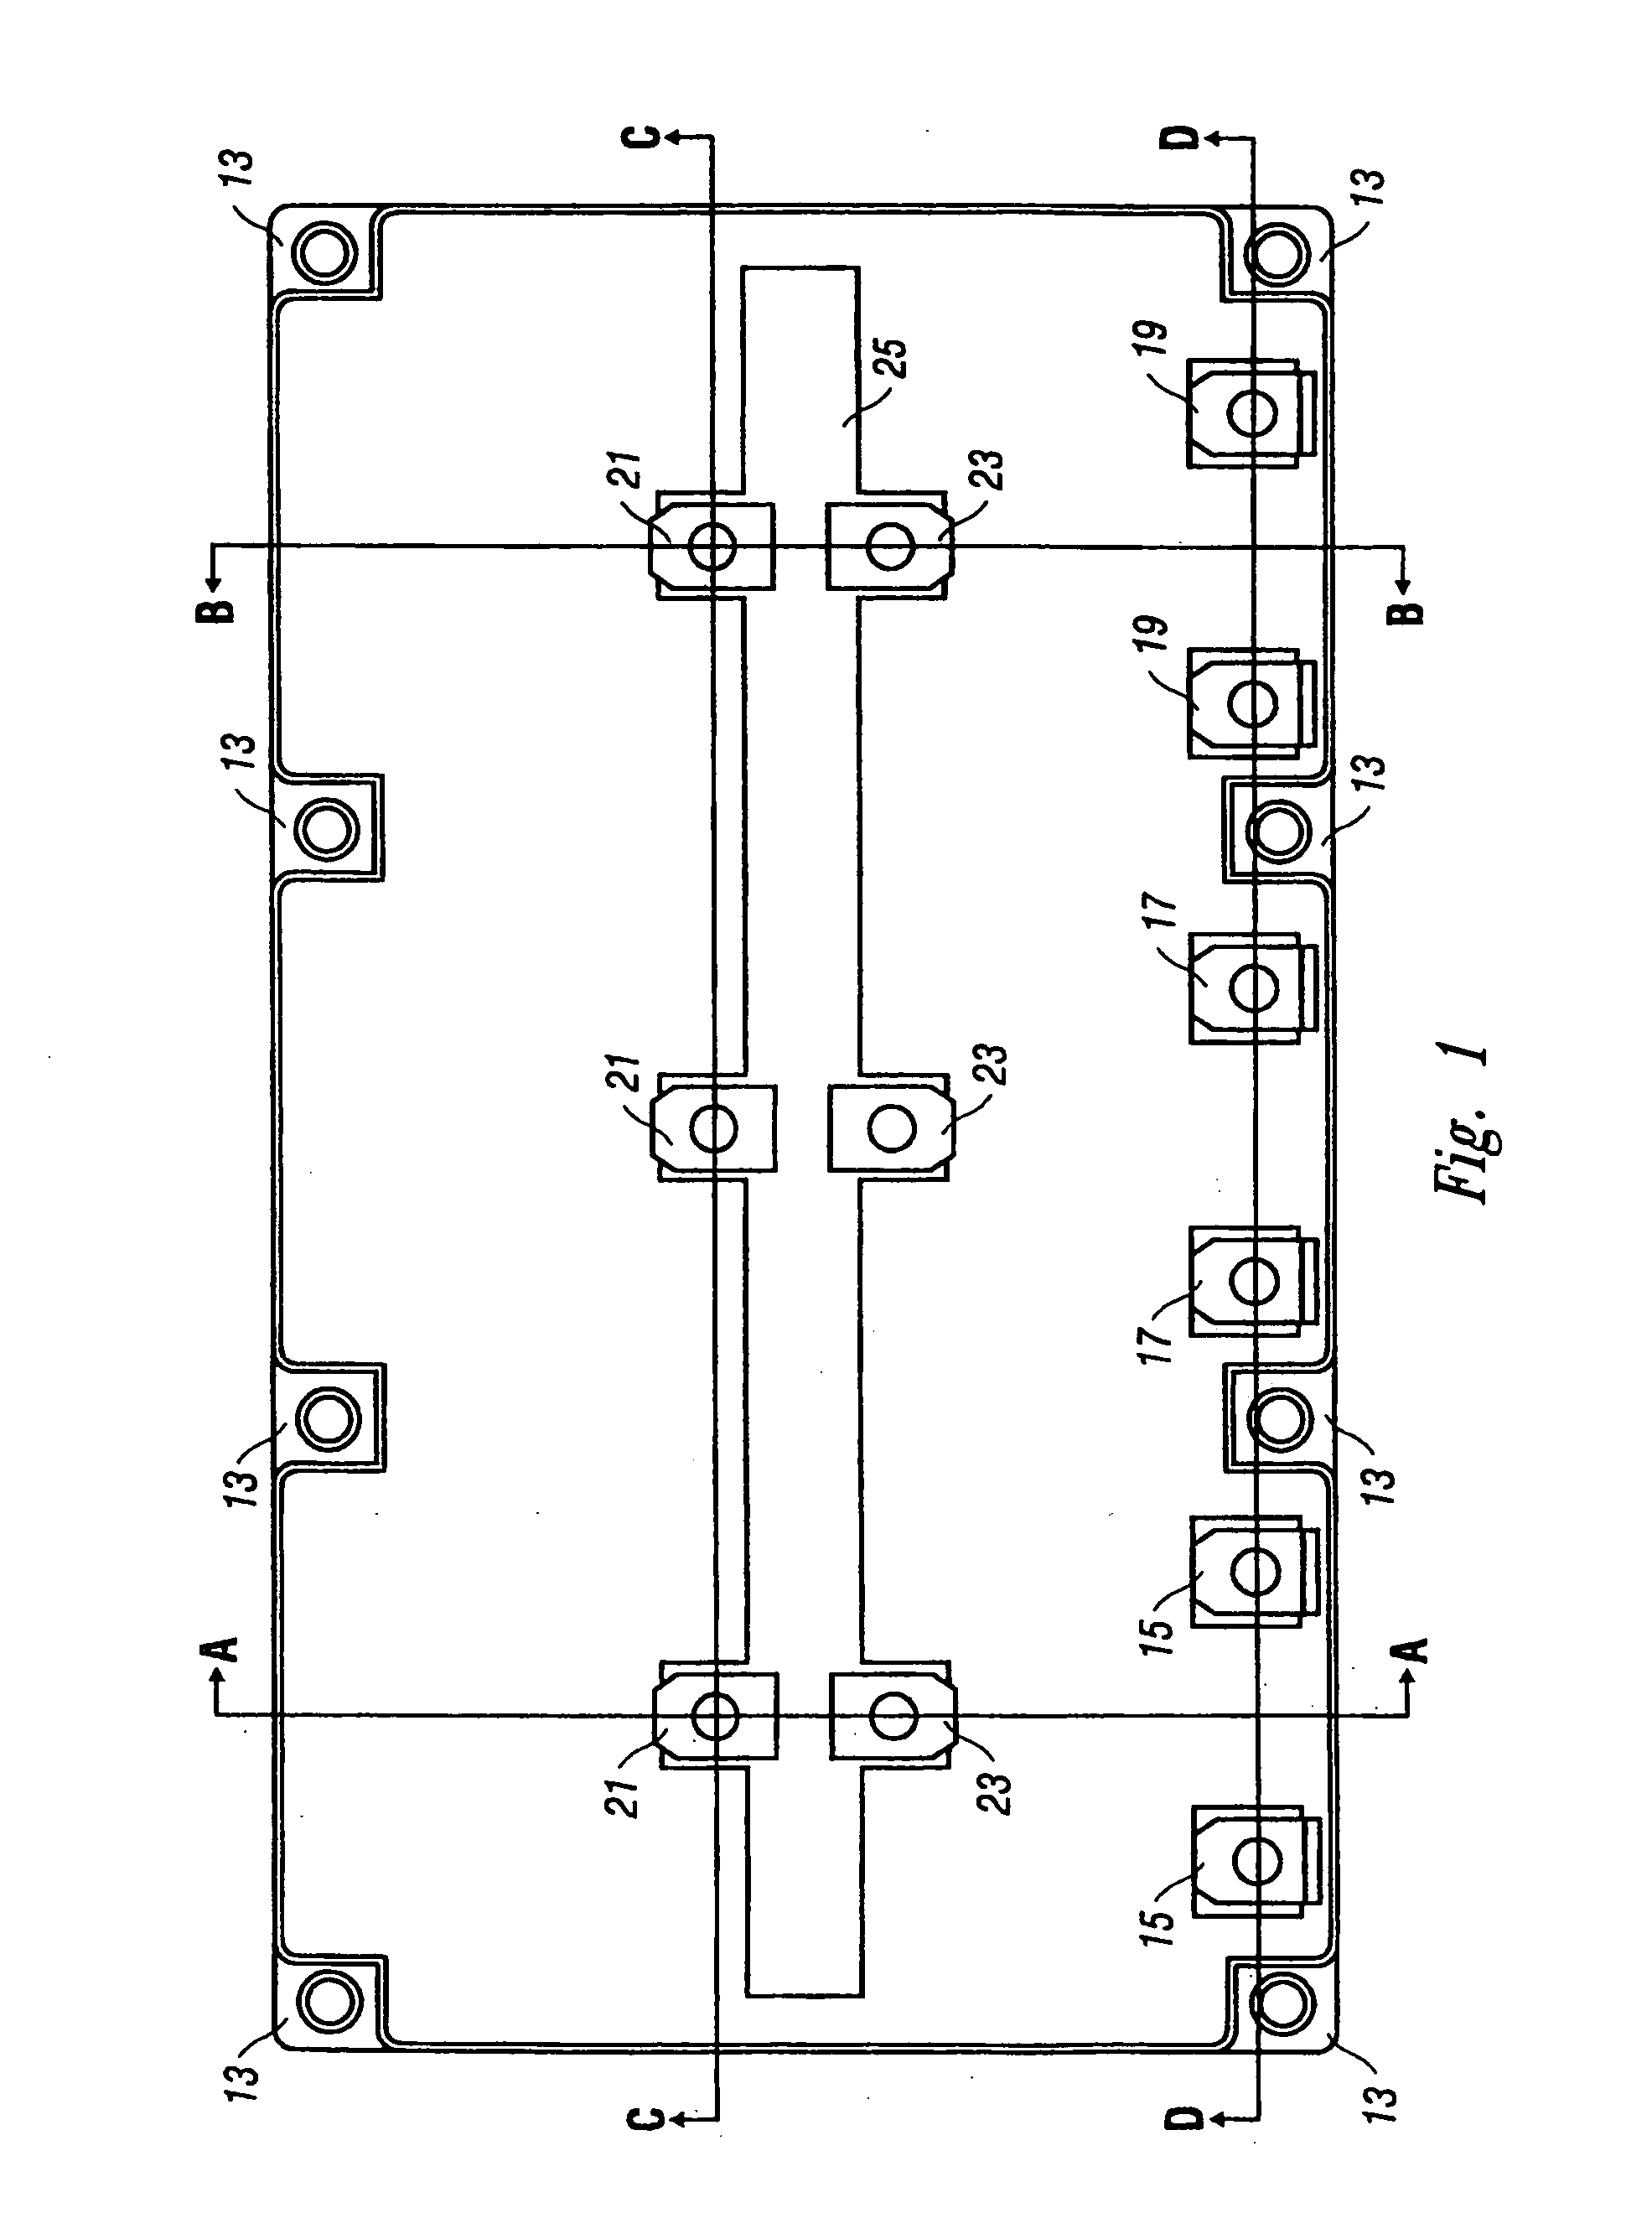 Leadframe-based module DC bus design to reduce module inductance